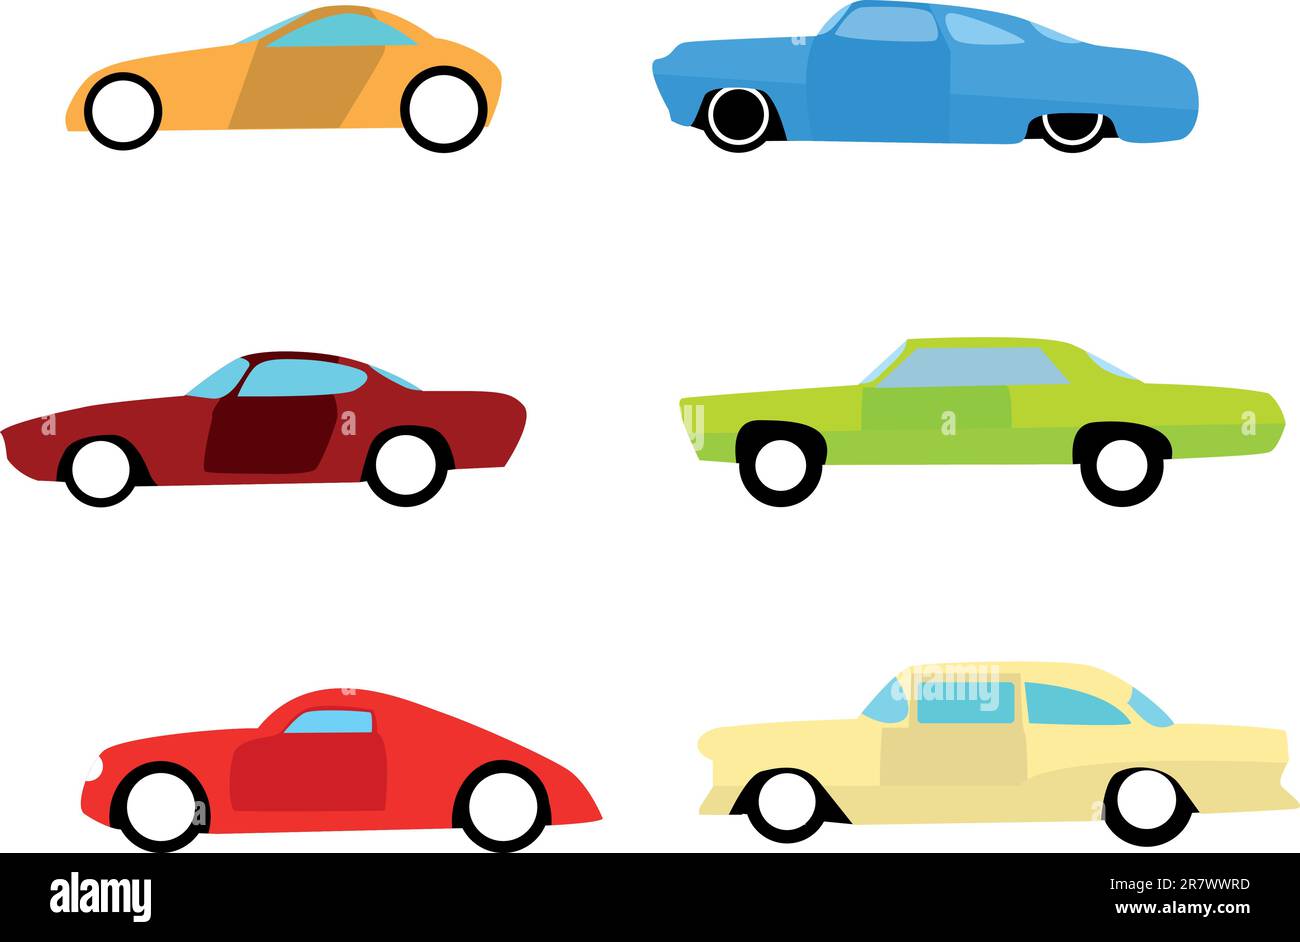 Simple illustration, hot rod color cars isolated on white. Stock Vector